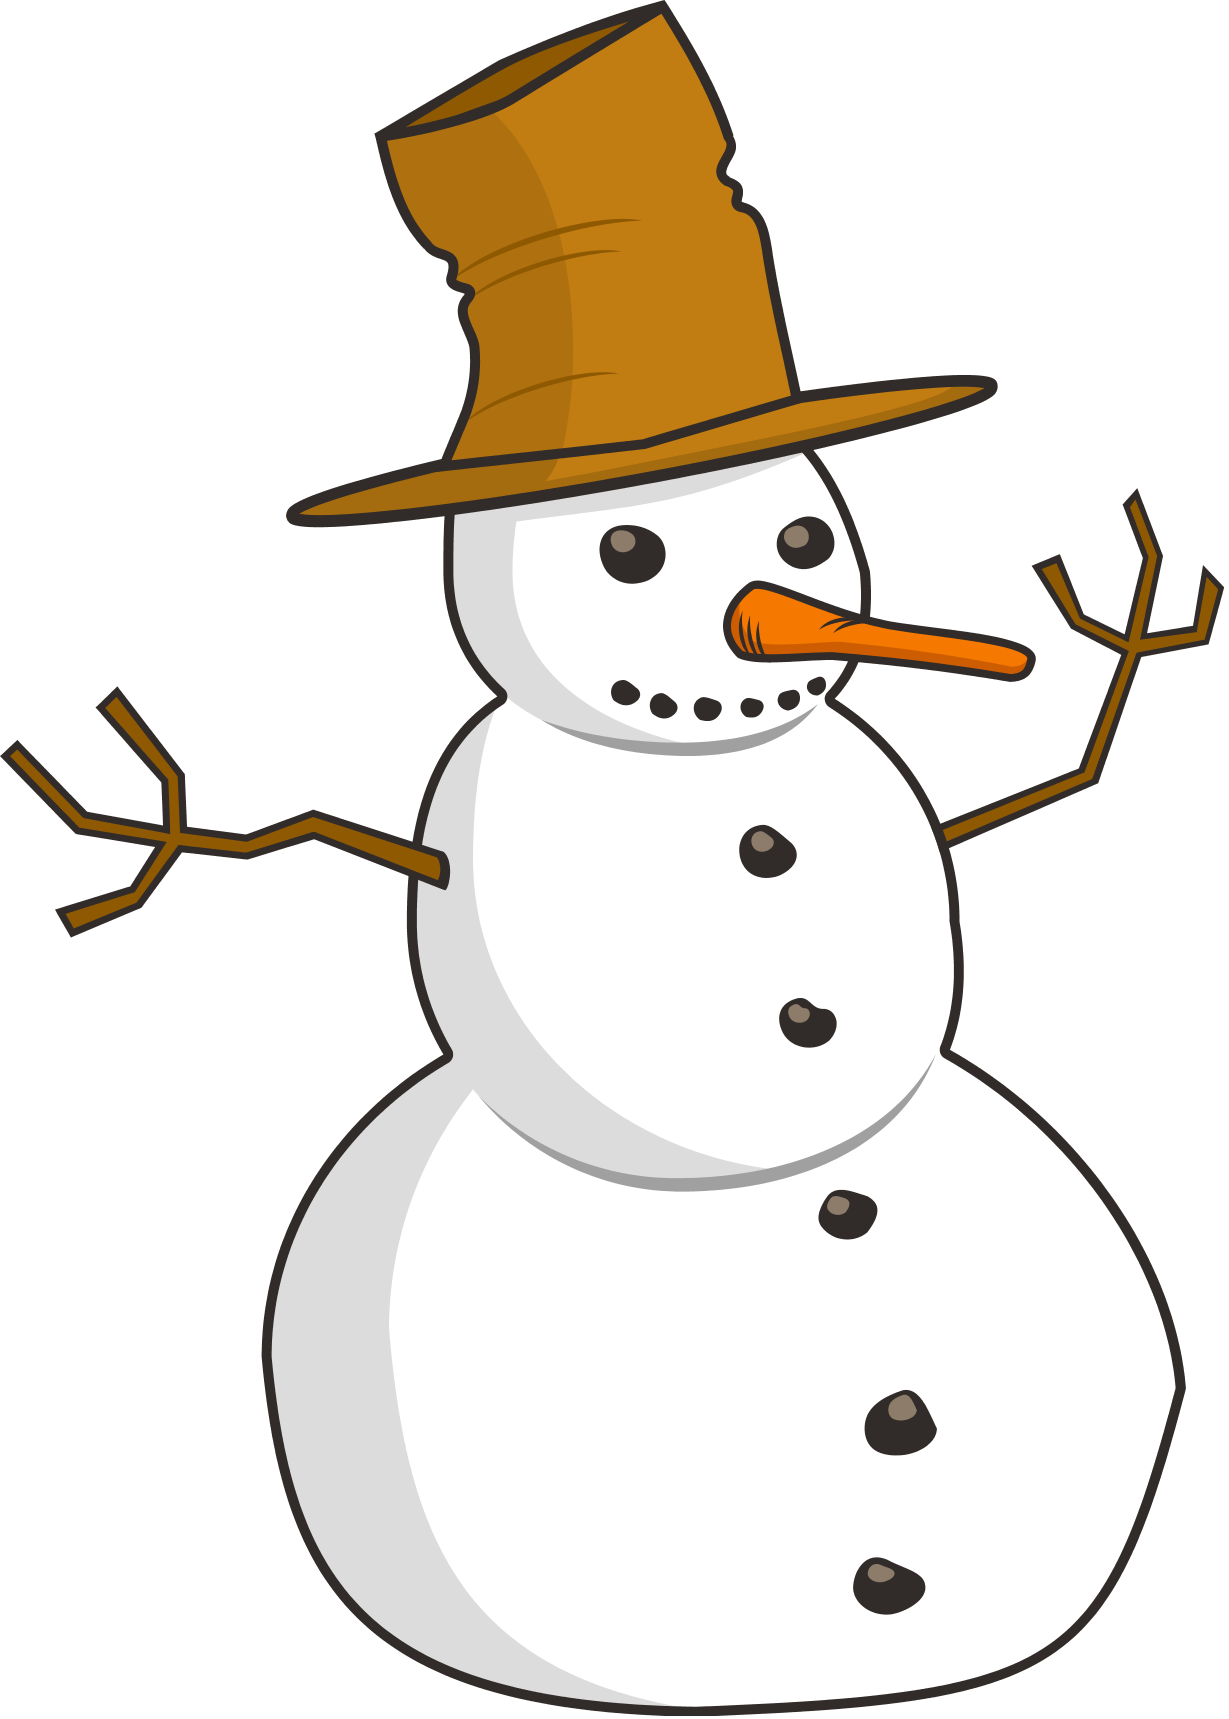 Free Snowman Images Hd Image Clipart